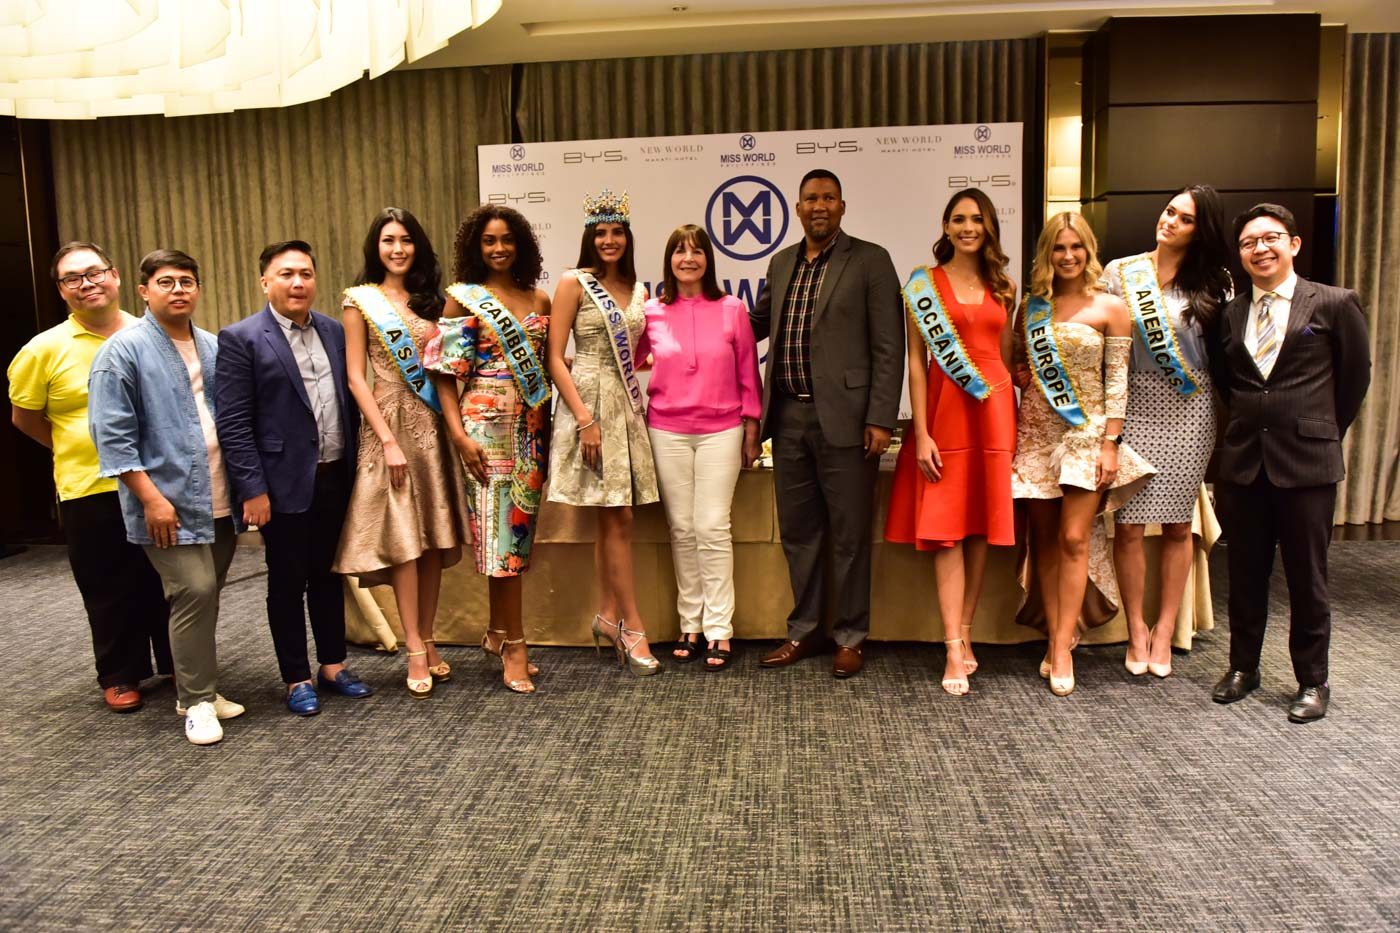 Stephanie with her continental queens,  Miss World Organization chairperson Julia Morley, Chief Mandela, and the Miss World Philippines heads during the press conference.  